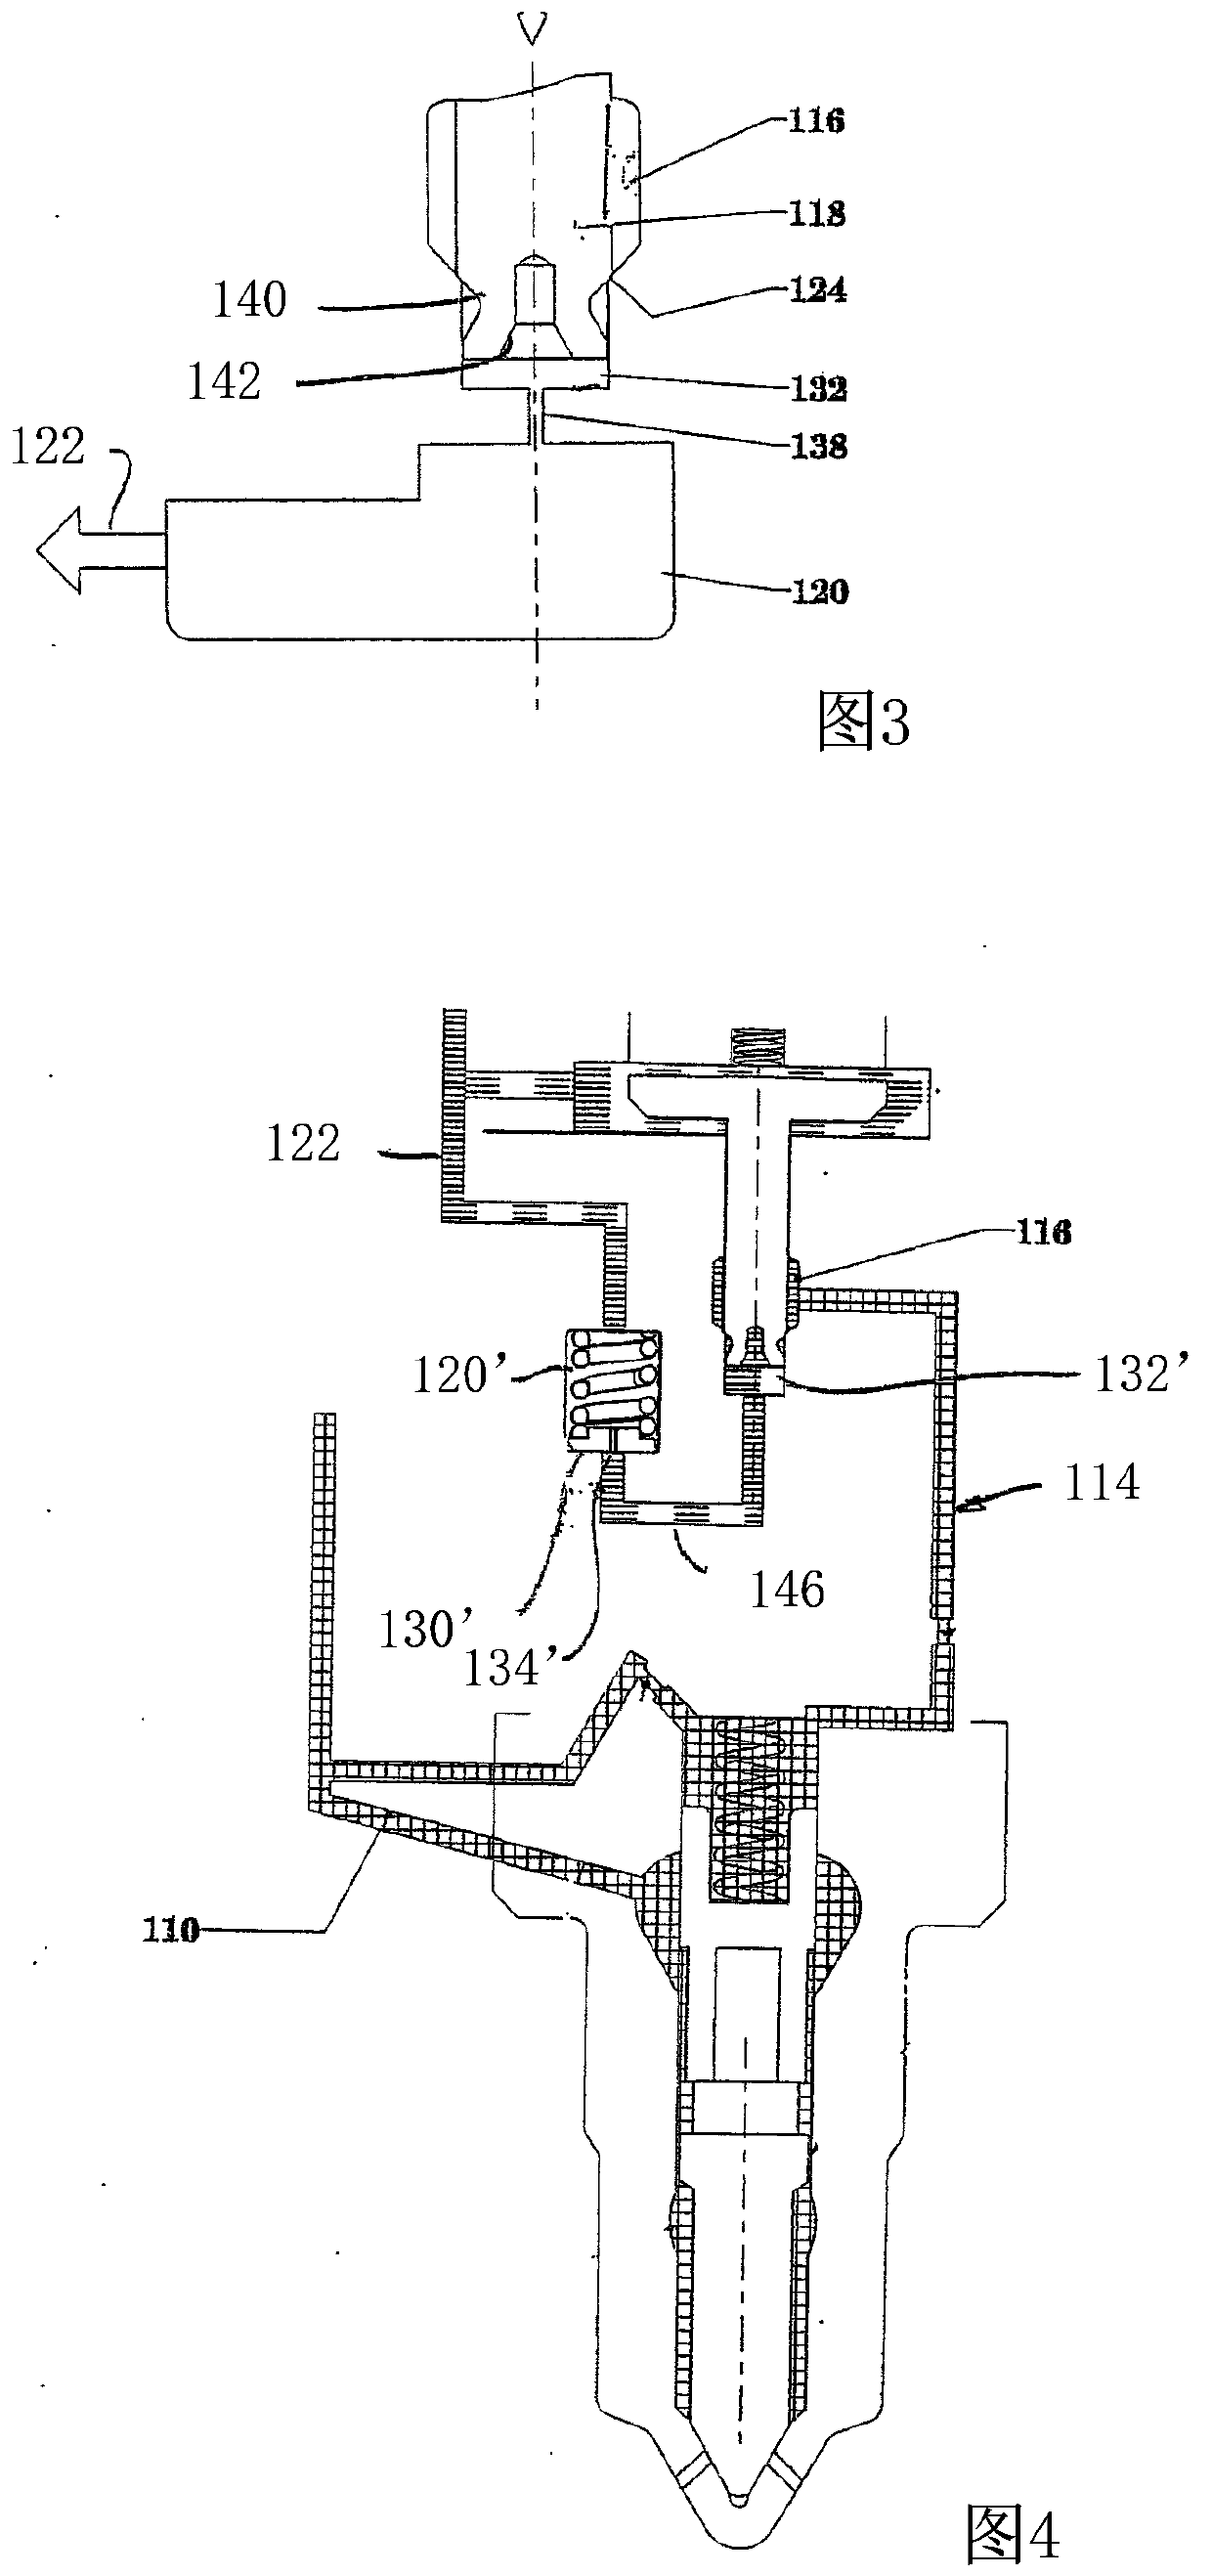 Anti-cavitation restrictors for injector control valves